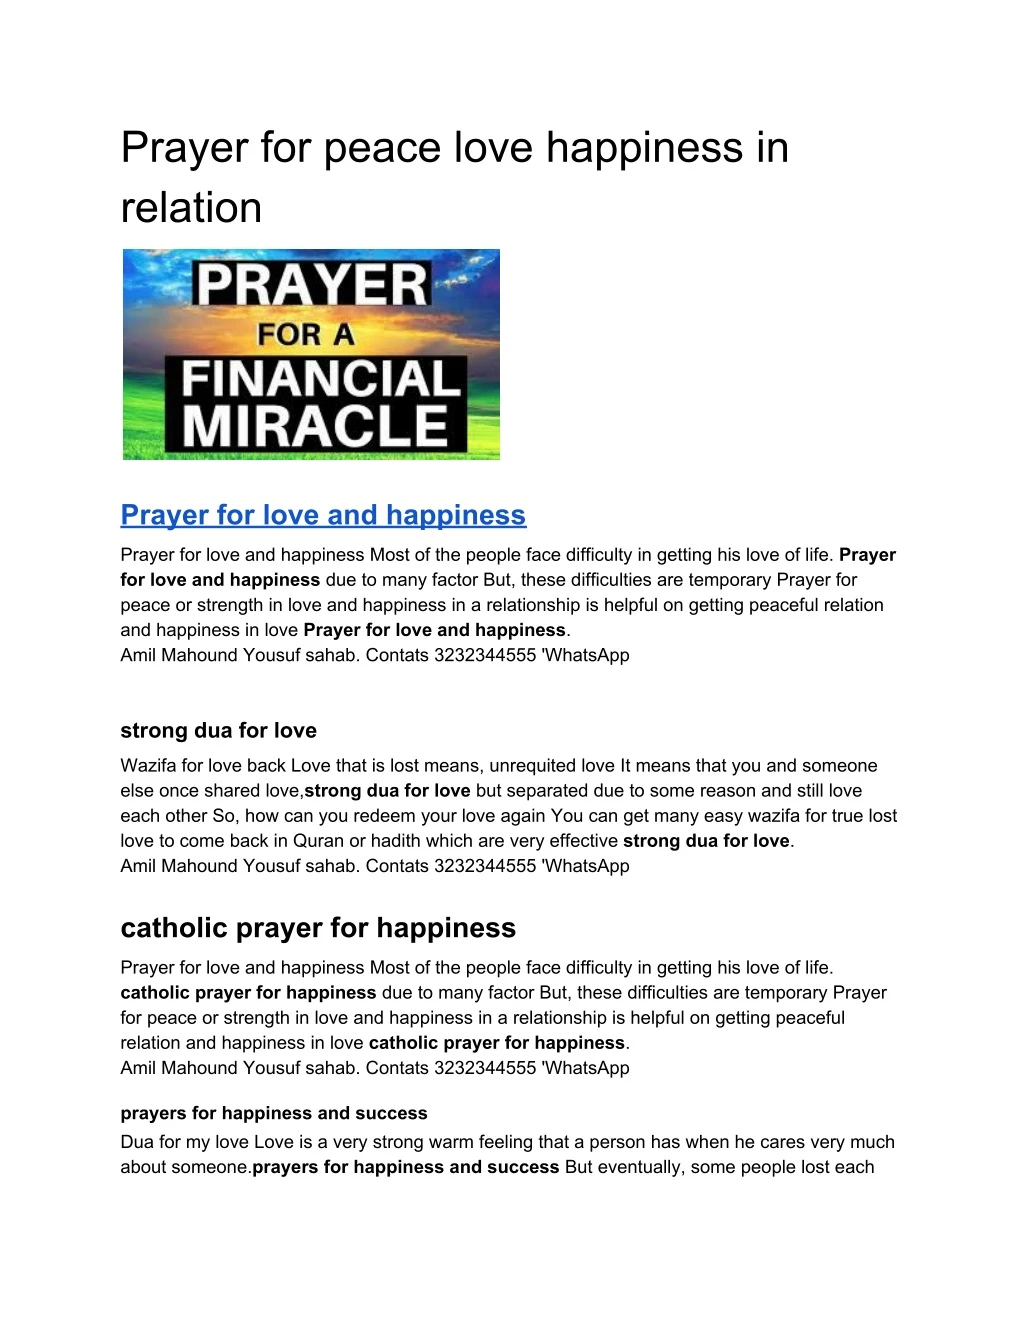 prayer for peace love happiness in relation